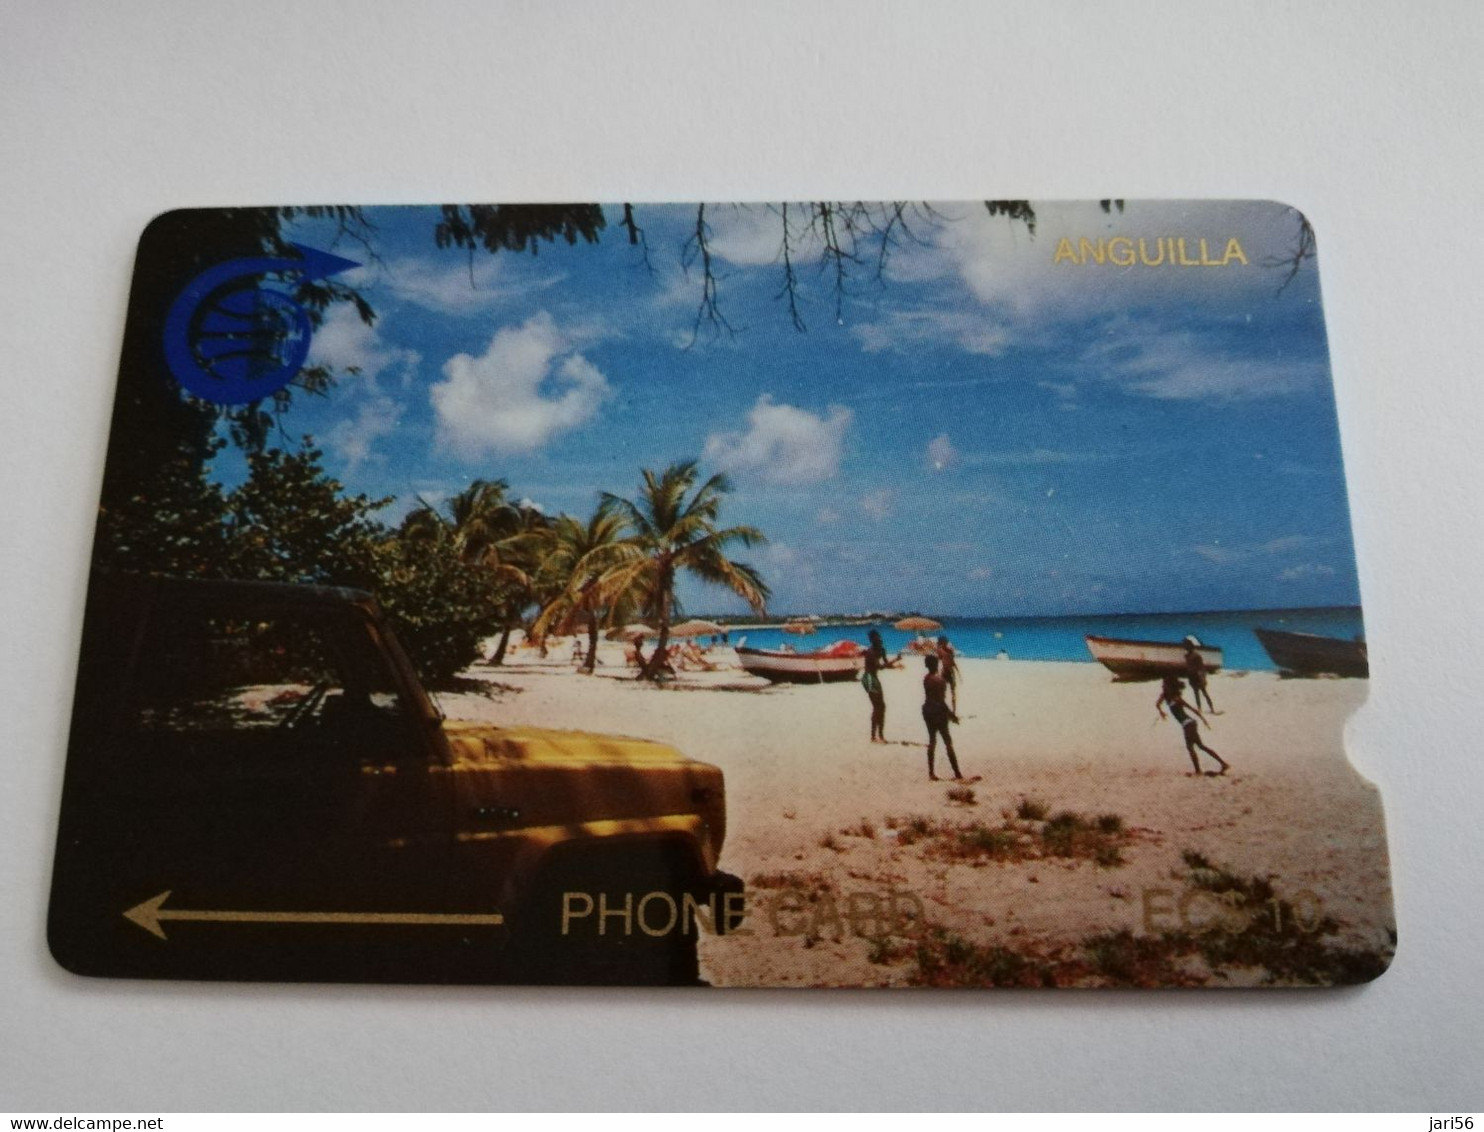 ANGUILLA  GPT    $10,-  FIRST ISSUE  1CAGB DEEP NOTCH      USED CARD  ** 8849** - Anguilla